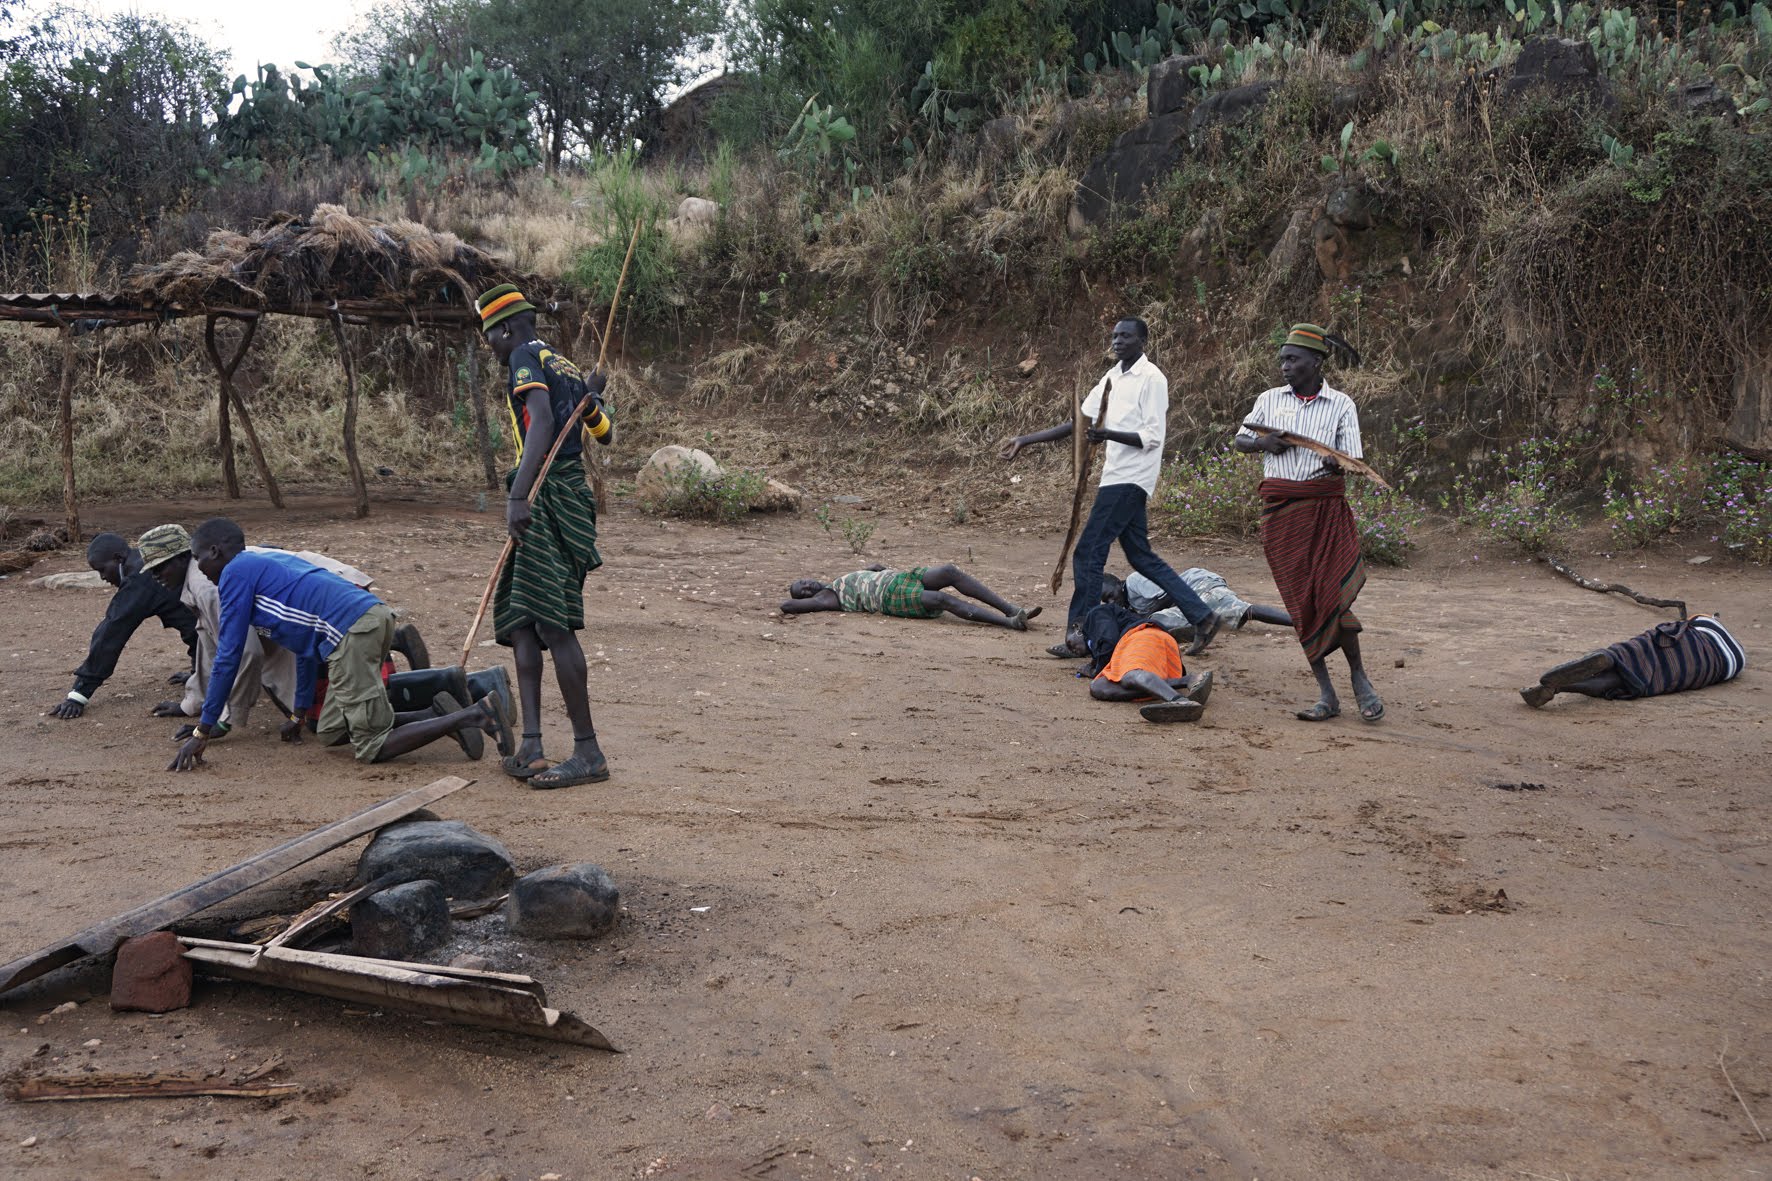 A scene re-enacting cattle theft with several tribal members lying on the ground, some walking on all fours representing cattle and some holding big branches, which represent guns.